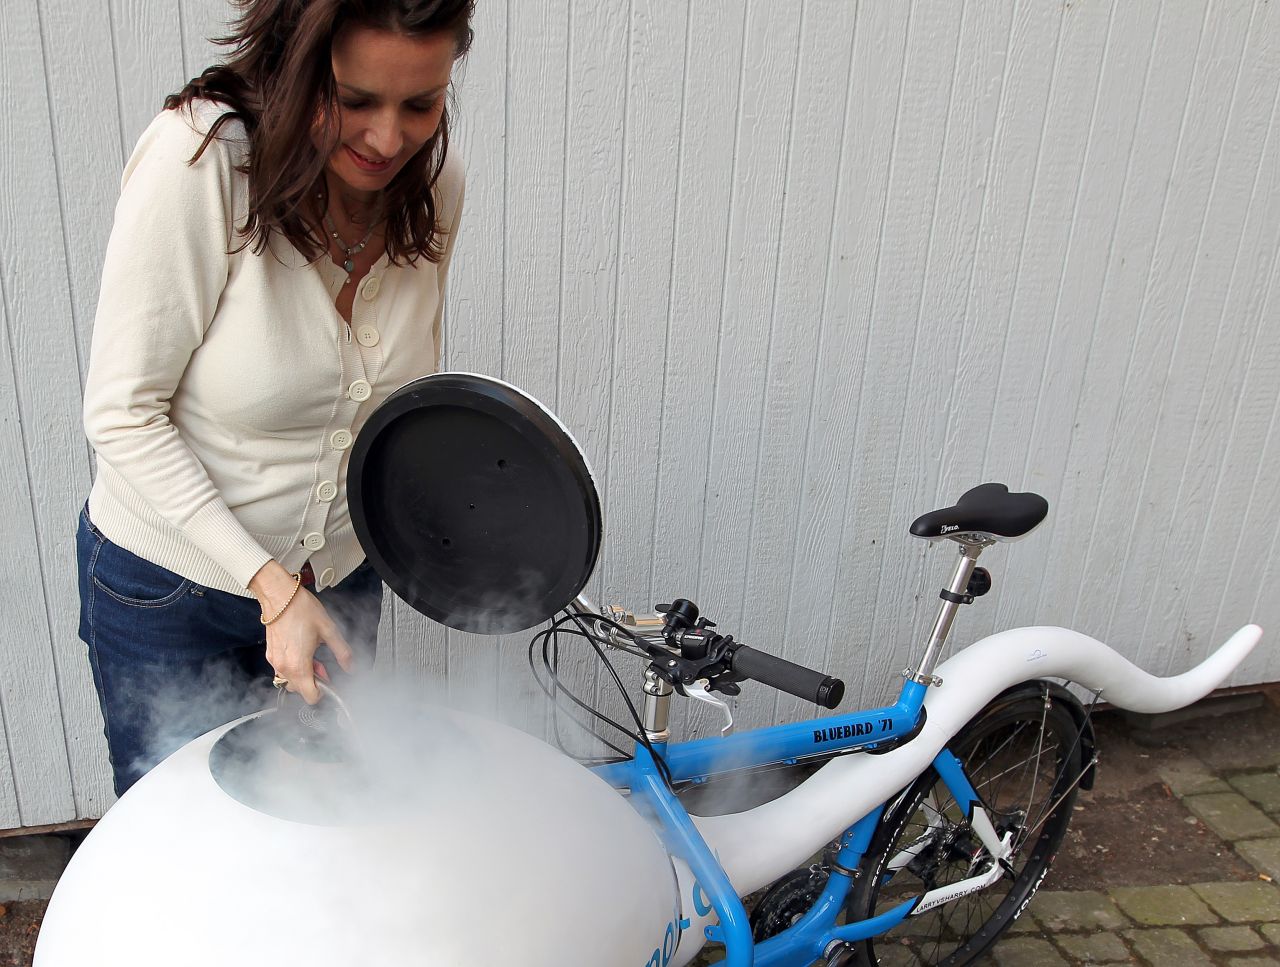 The sperm bike utilizes a nitrogen tank cooled to -320 degrees F.